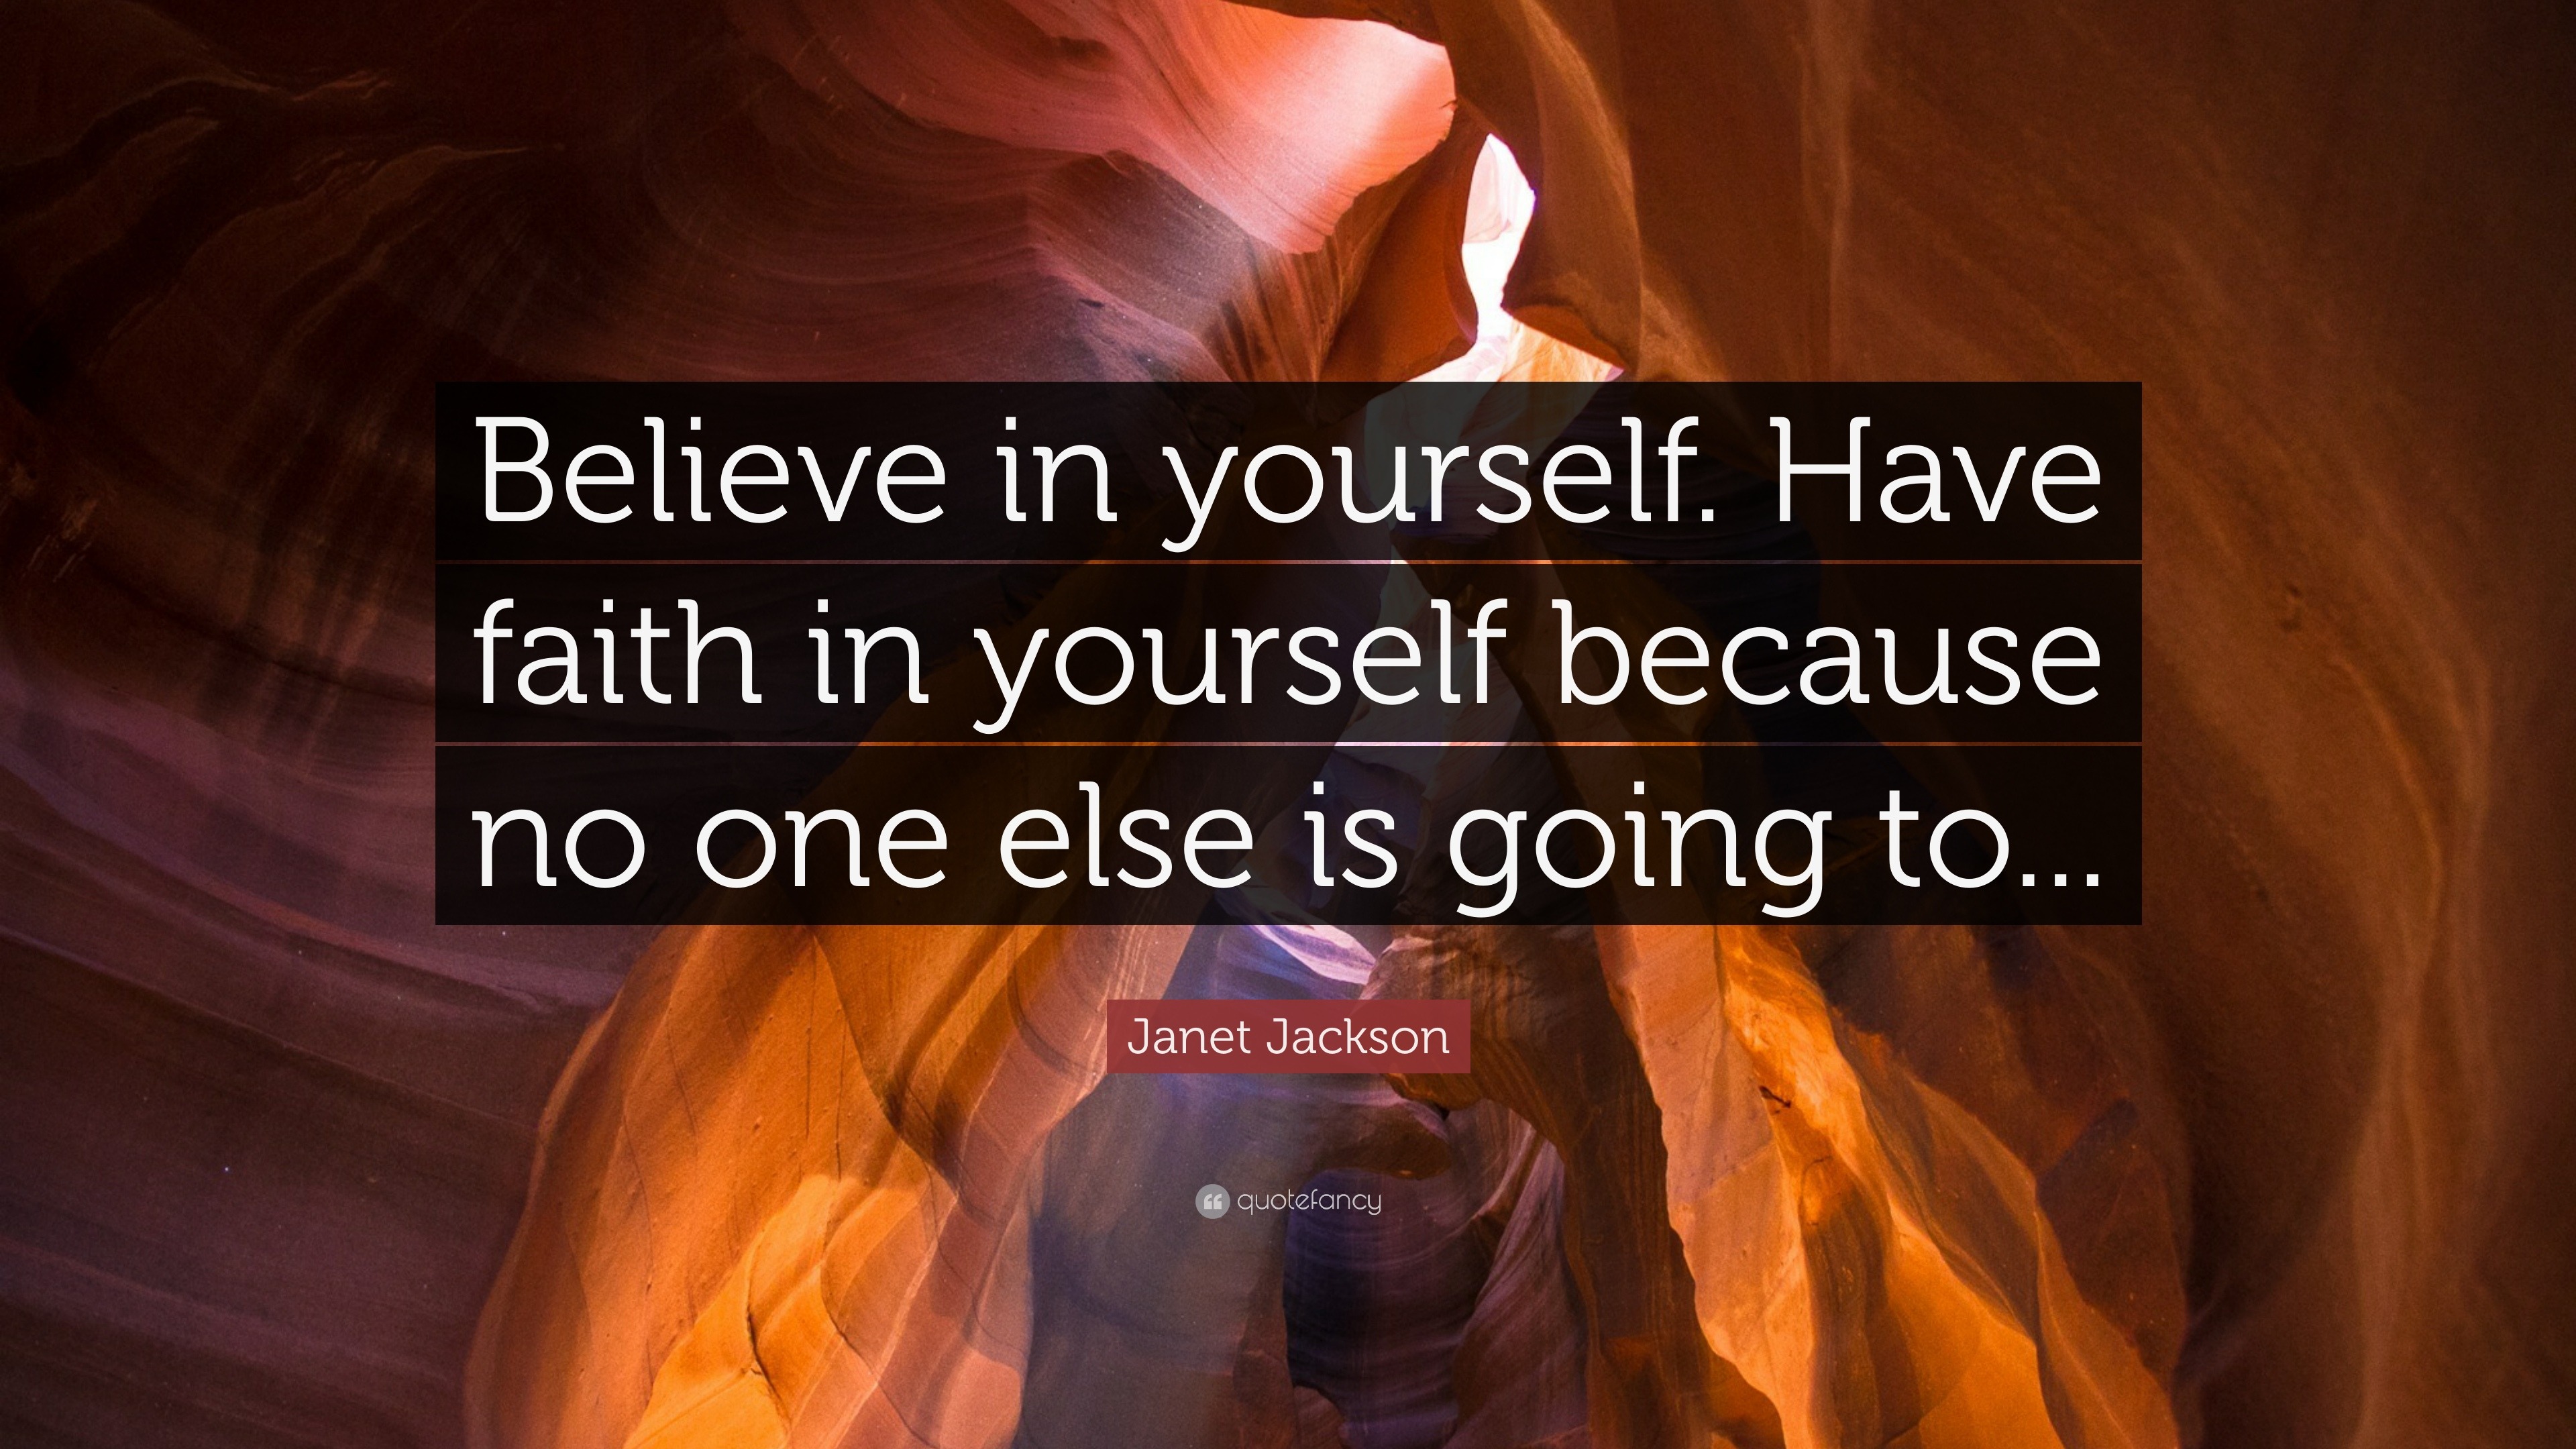 Janet Jackson Quote: “Believe in yourself. Have faith in yourself